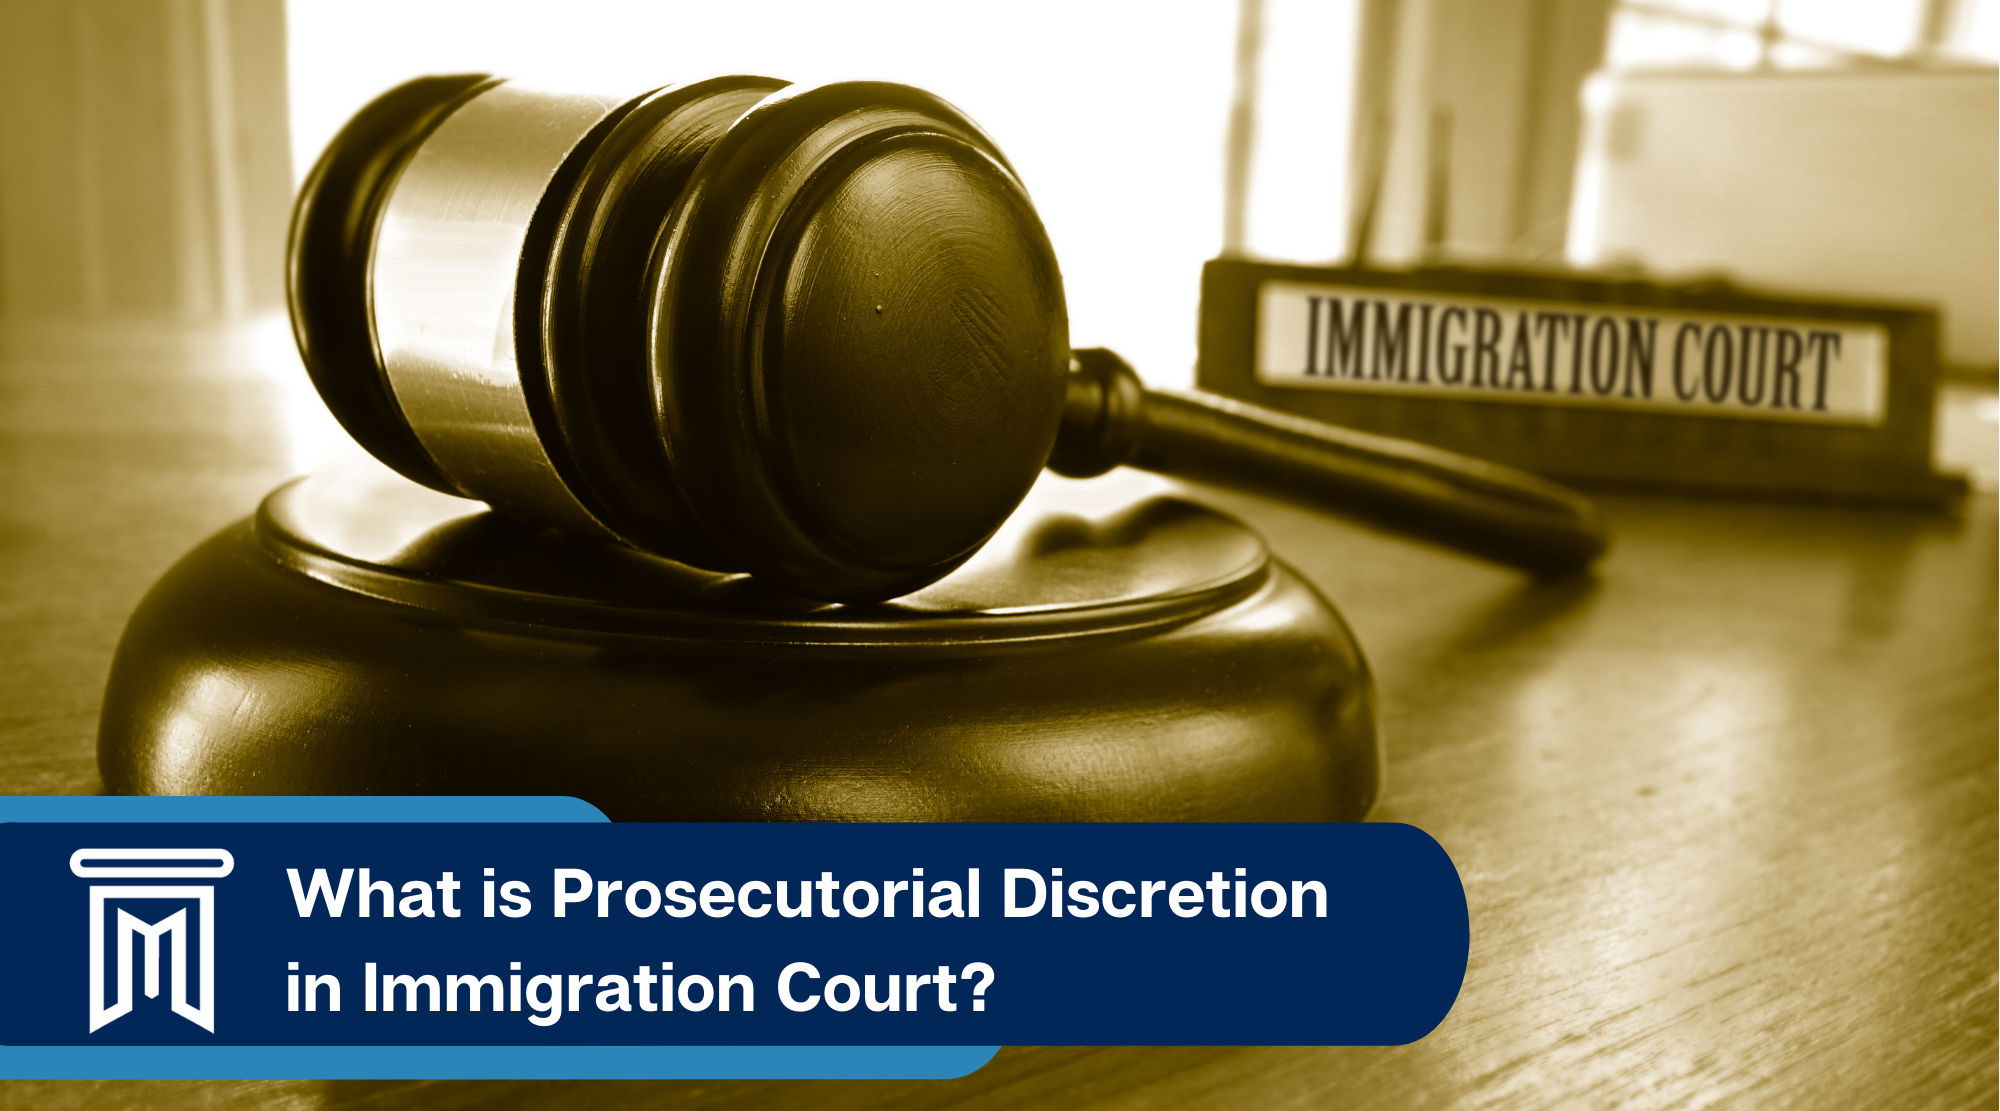 What is Prosecutorial Discretion in immigration court?